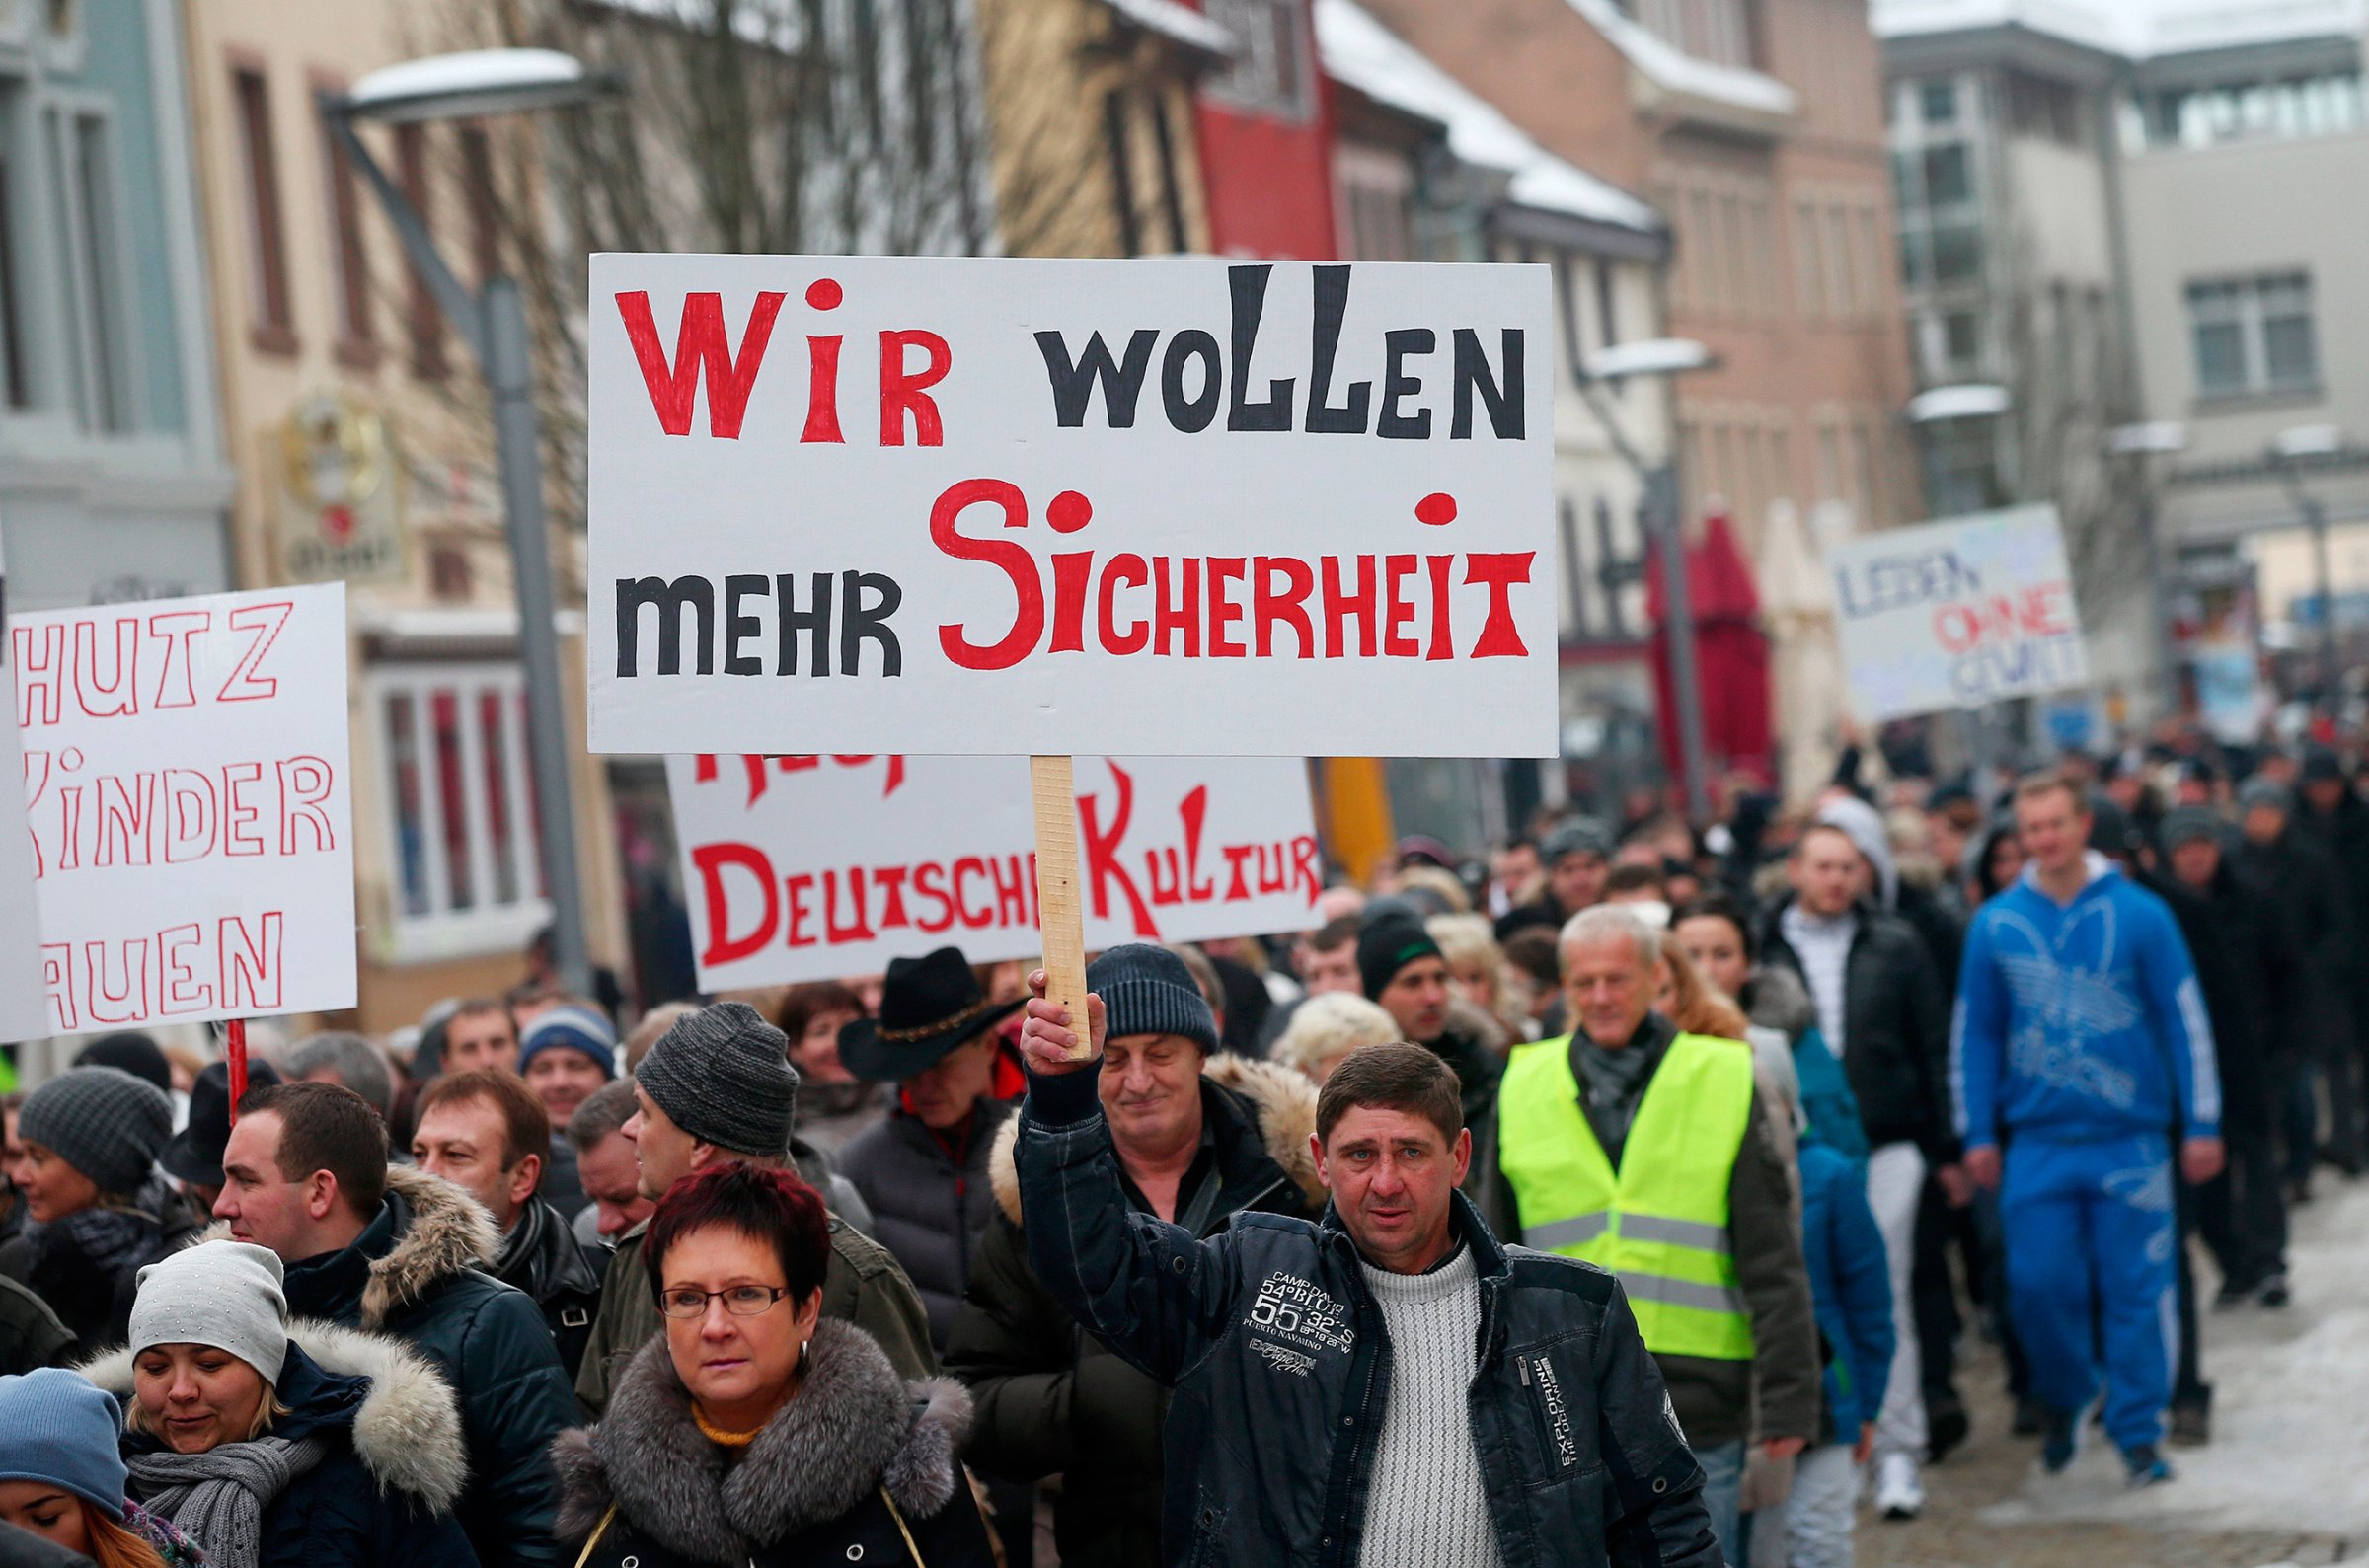 Hundreds of Russlanddeutsche, or ethnic Germans who had formerly lived in Russia, demonstrate with signs reading "we want more security" and against violence in Villingen-Schwenningen, Germany, Jan. 24, 2016. The demonstration took place in connection with the alleged rape of a 13-year-old girl by a refugee, which the police say did not happen.